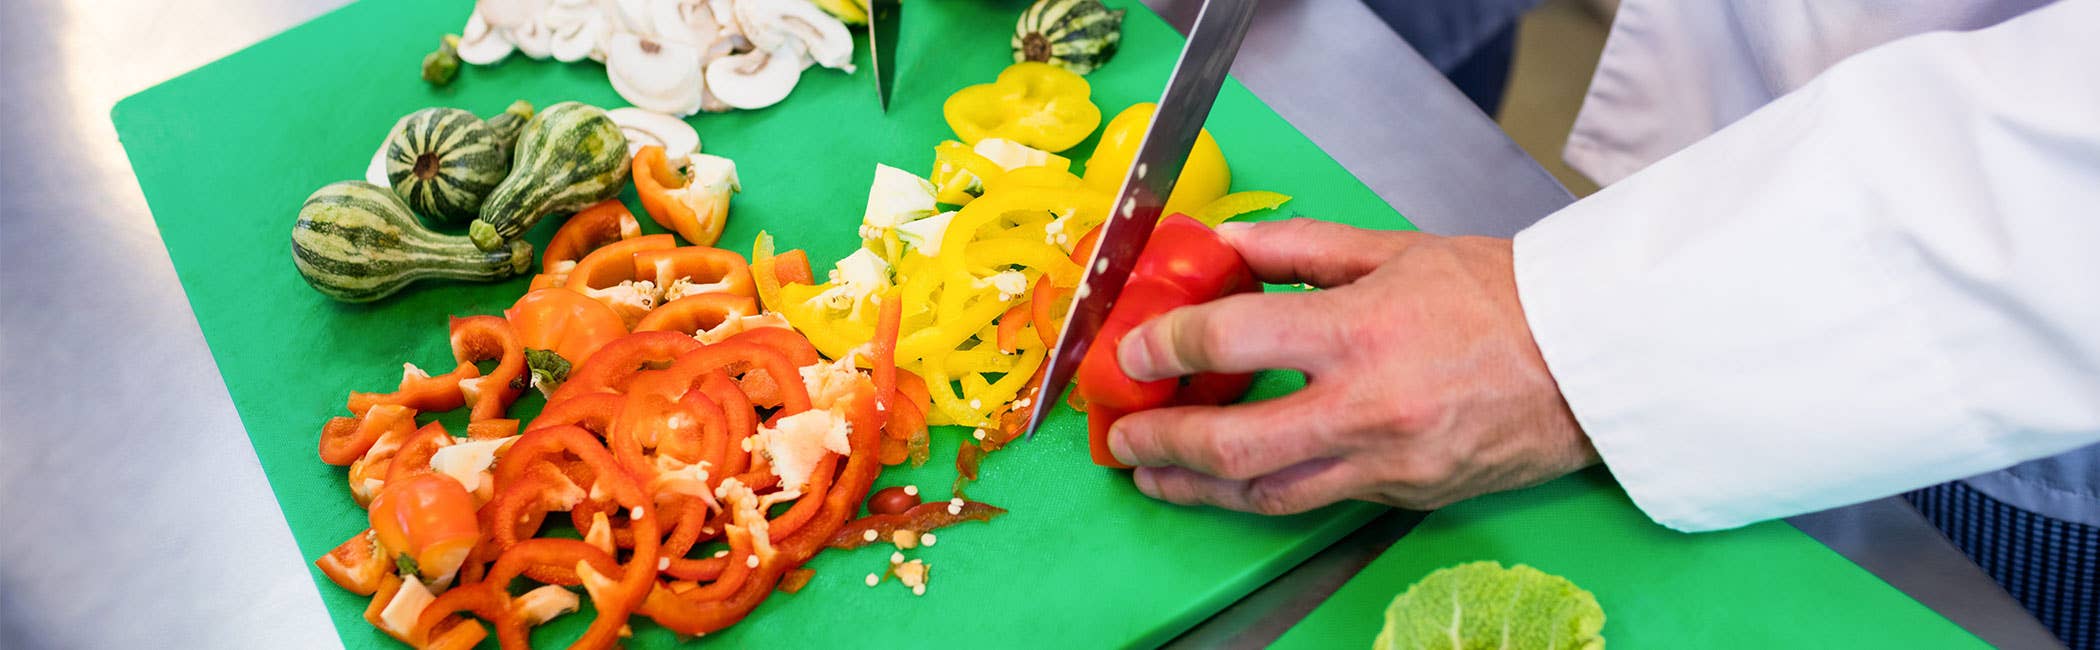 Hospitality Problems - COLOR CODED CHOPPING BOARDS: COLORS TO PREVENT FOOD  CROSS-CONTAMINATION Ensure you check your own chopping board system as the  colour-coding varies between food businesses: Cutting Board Color - Food